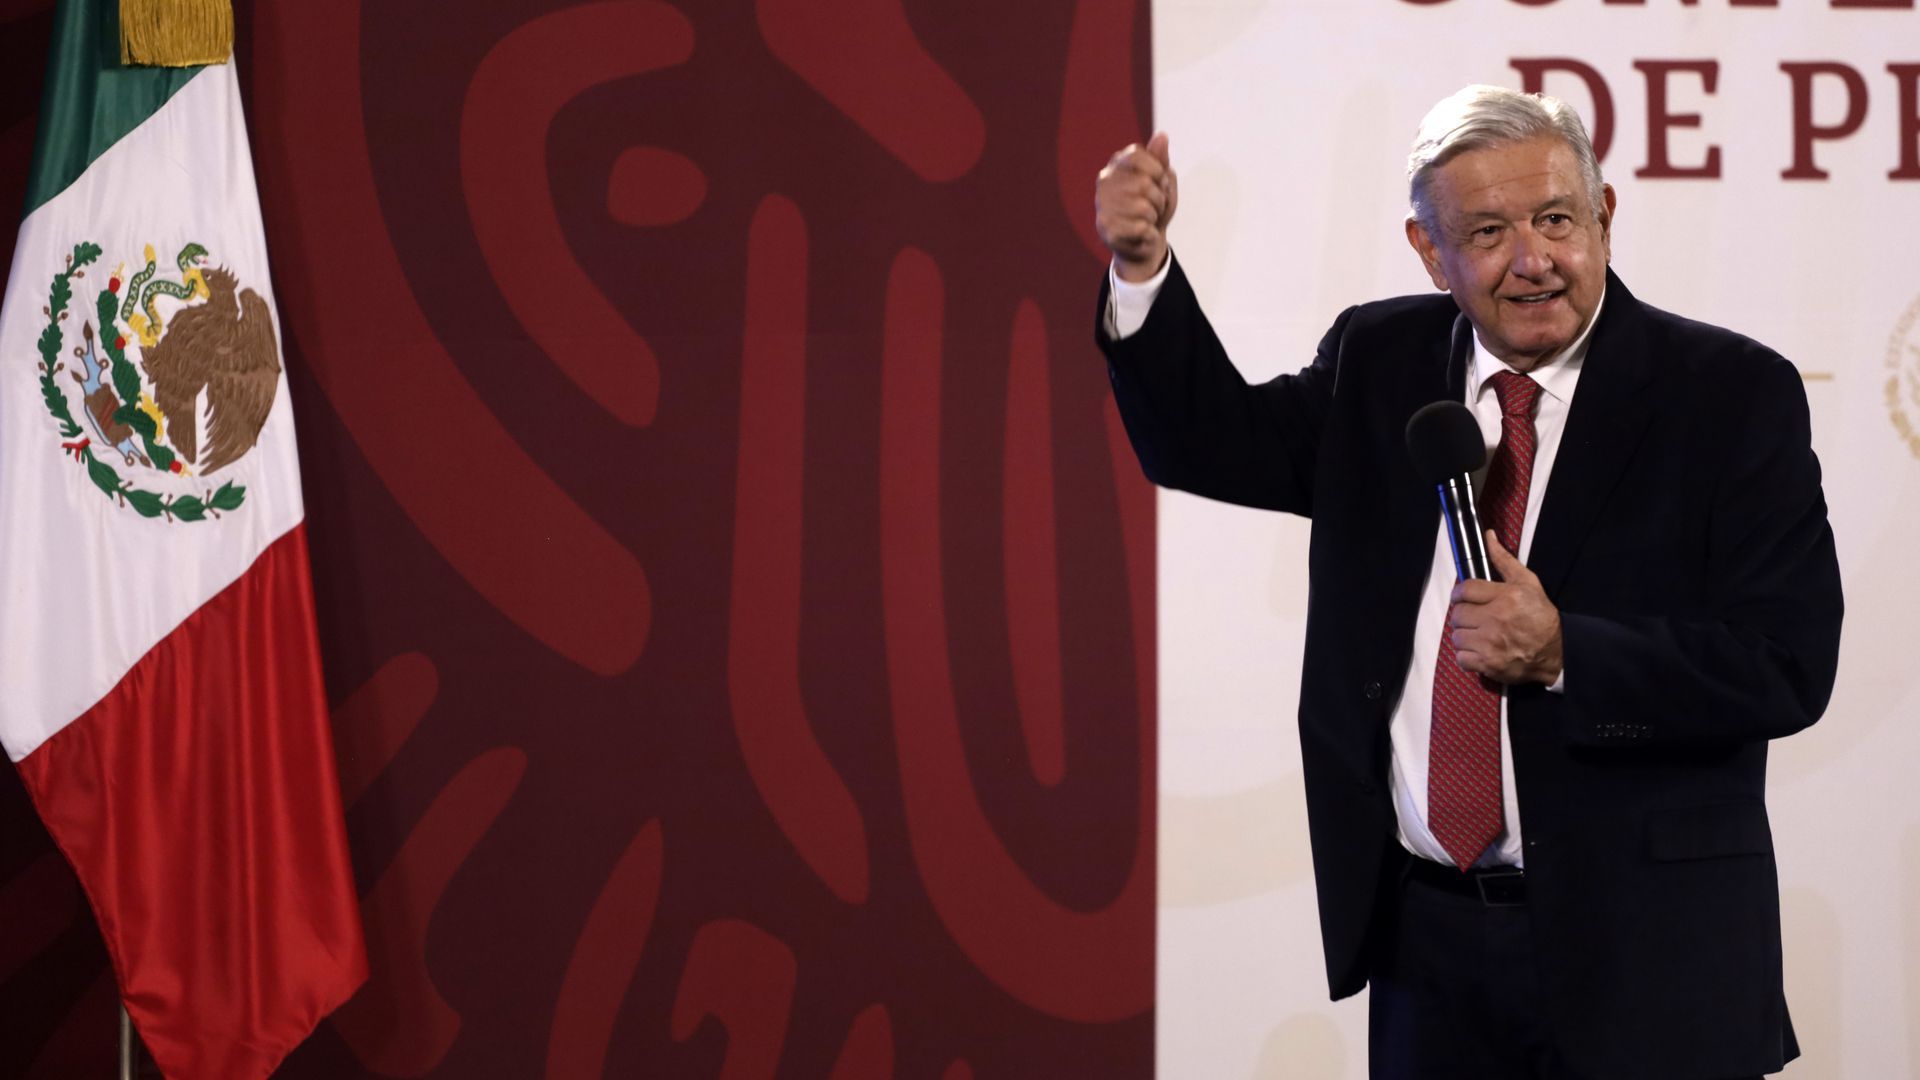 Mexican President Andrés Manuel López Obrador raises his hand and uses the other to hold a microphone while he speaks at a news briefing